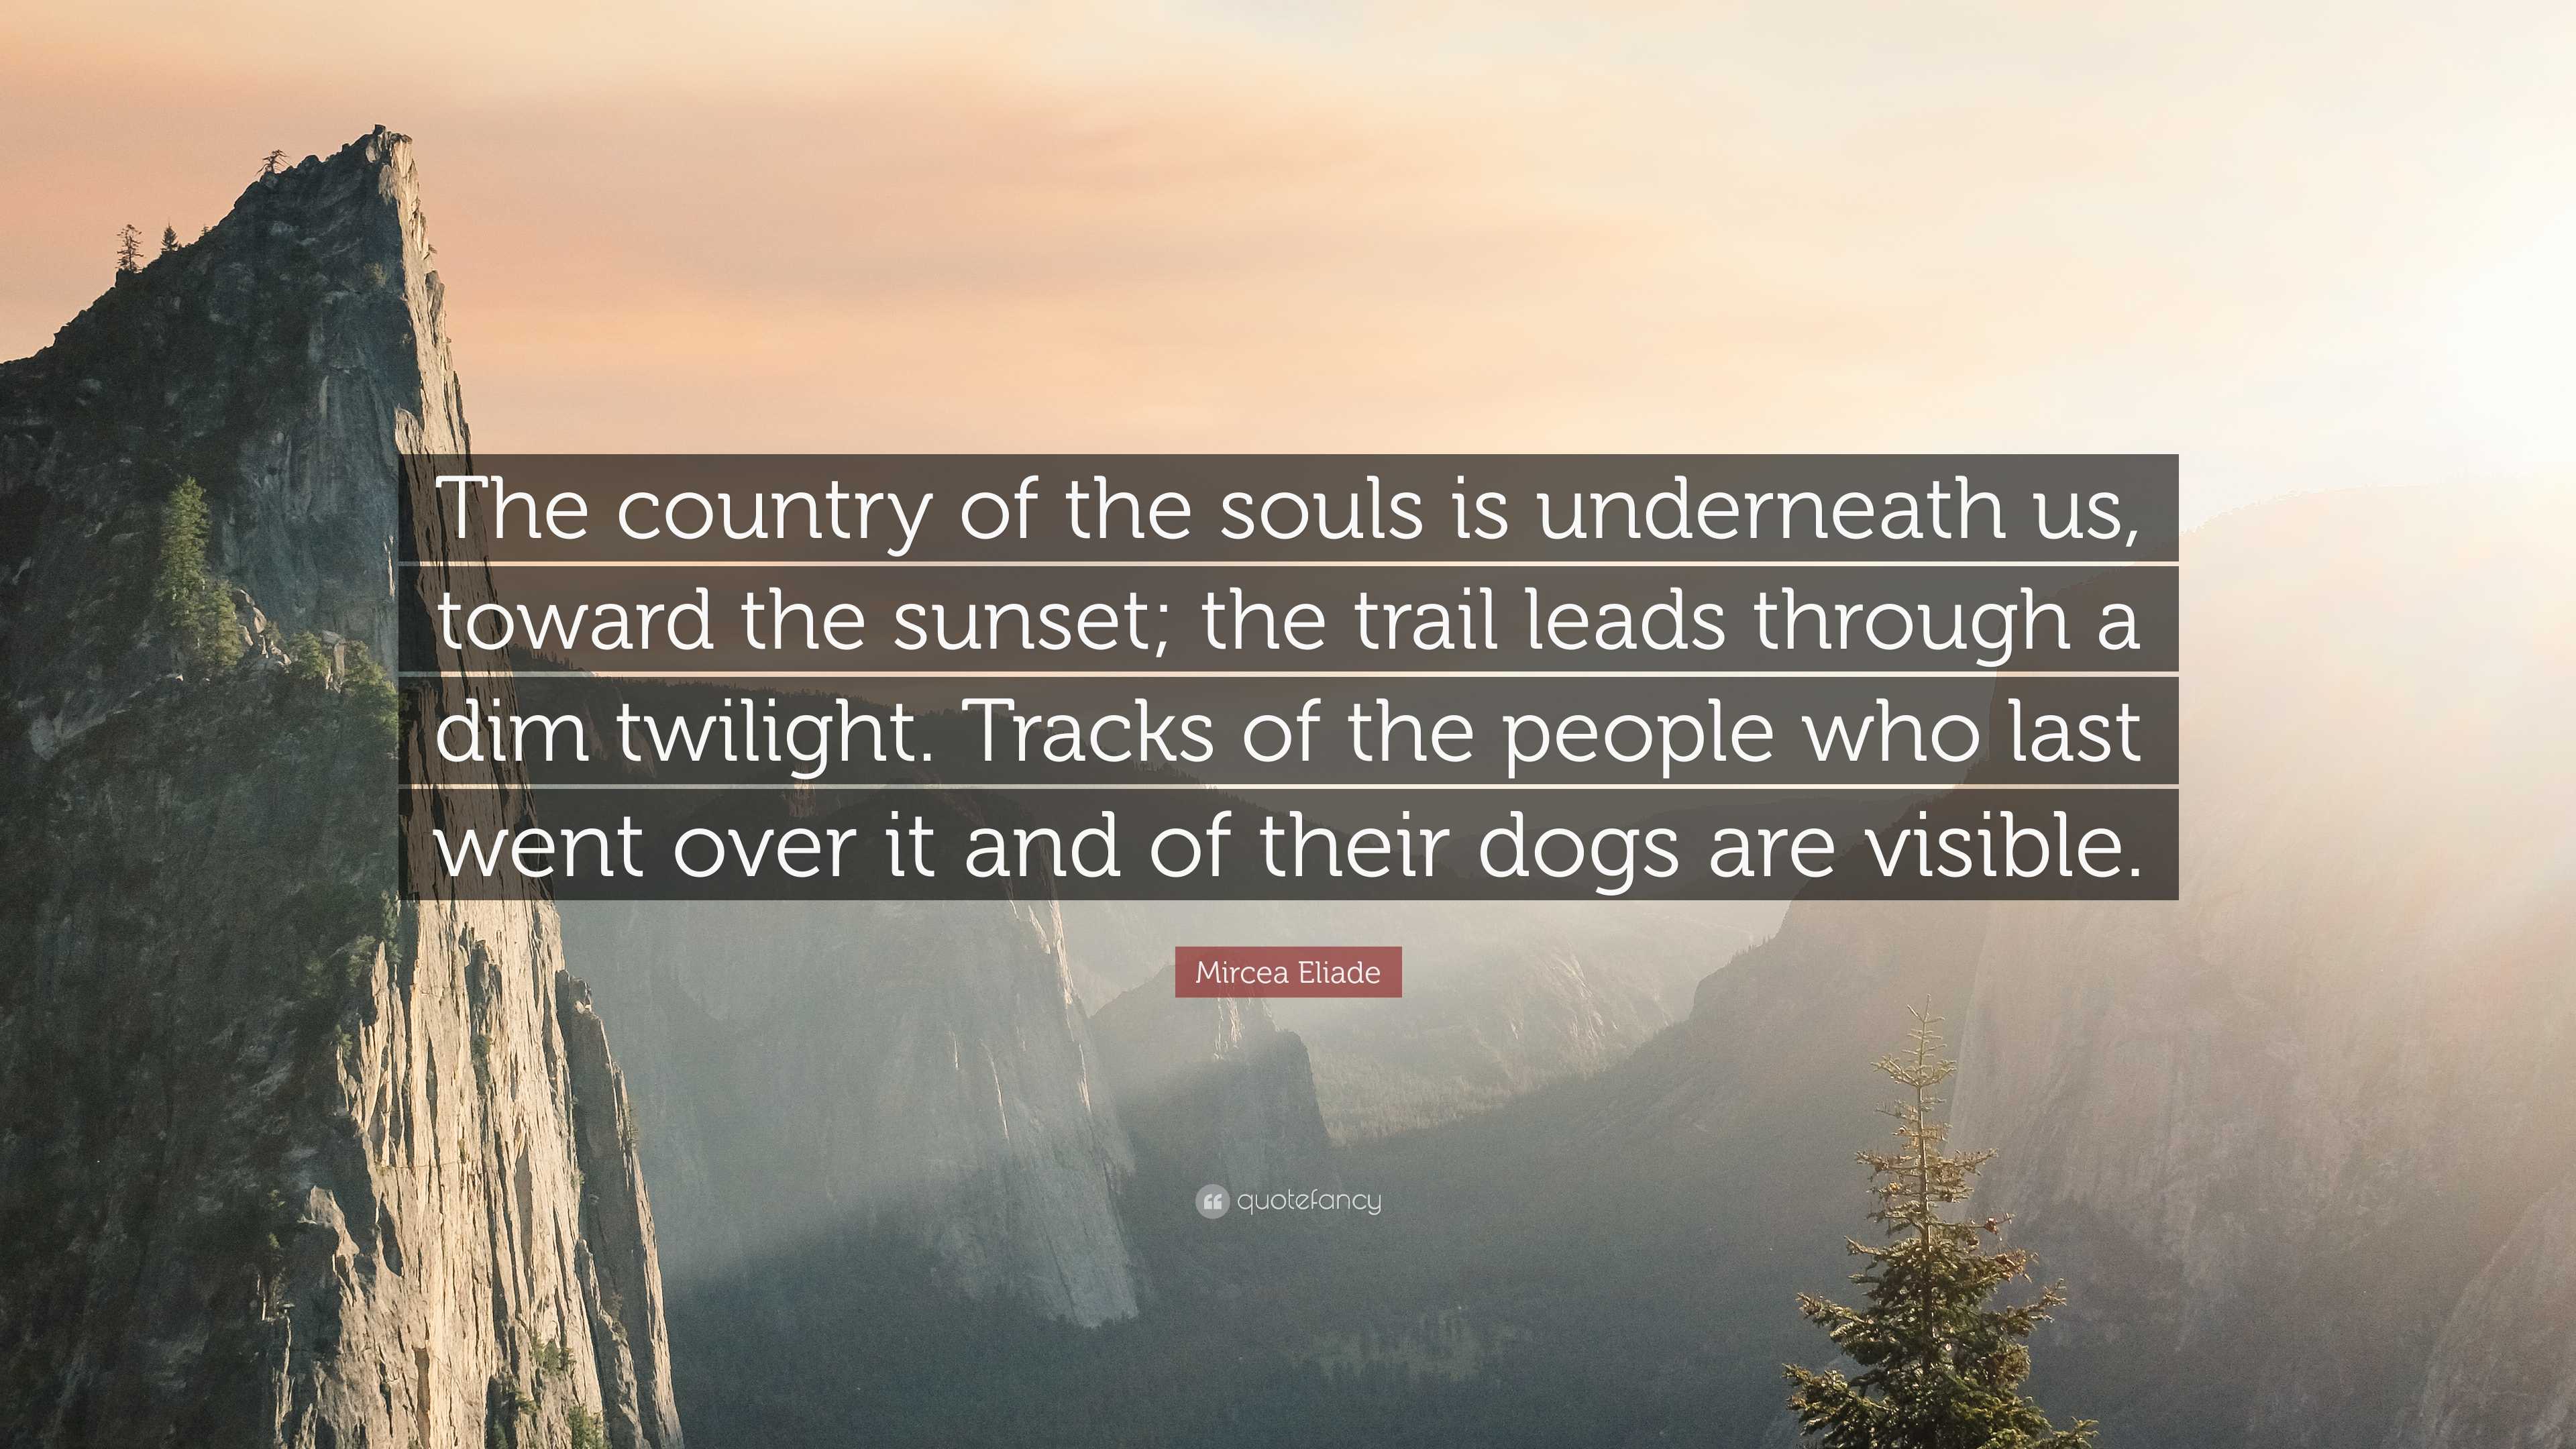 Mircea Eliade Quote: “The country of the souls is underneath us, toward the  sunset; the trail leads through a dim twilight. Tracks of the peop”